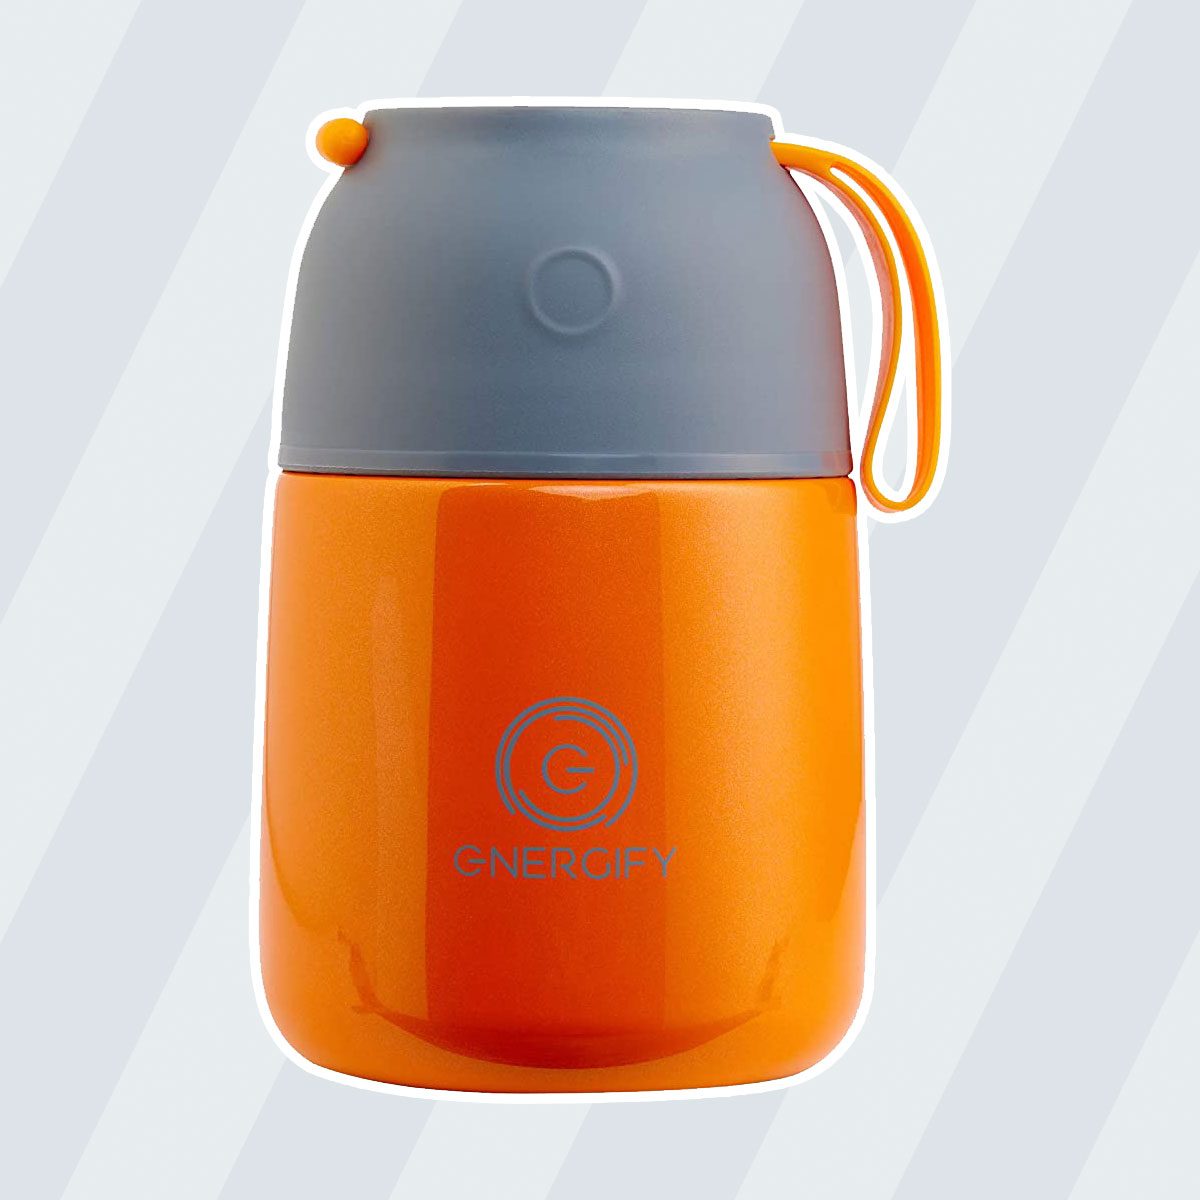 The Kimos Self-Heating Thermos Claims To Be The World's First Self-Heating  Thermos - IMBOLDN